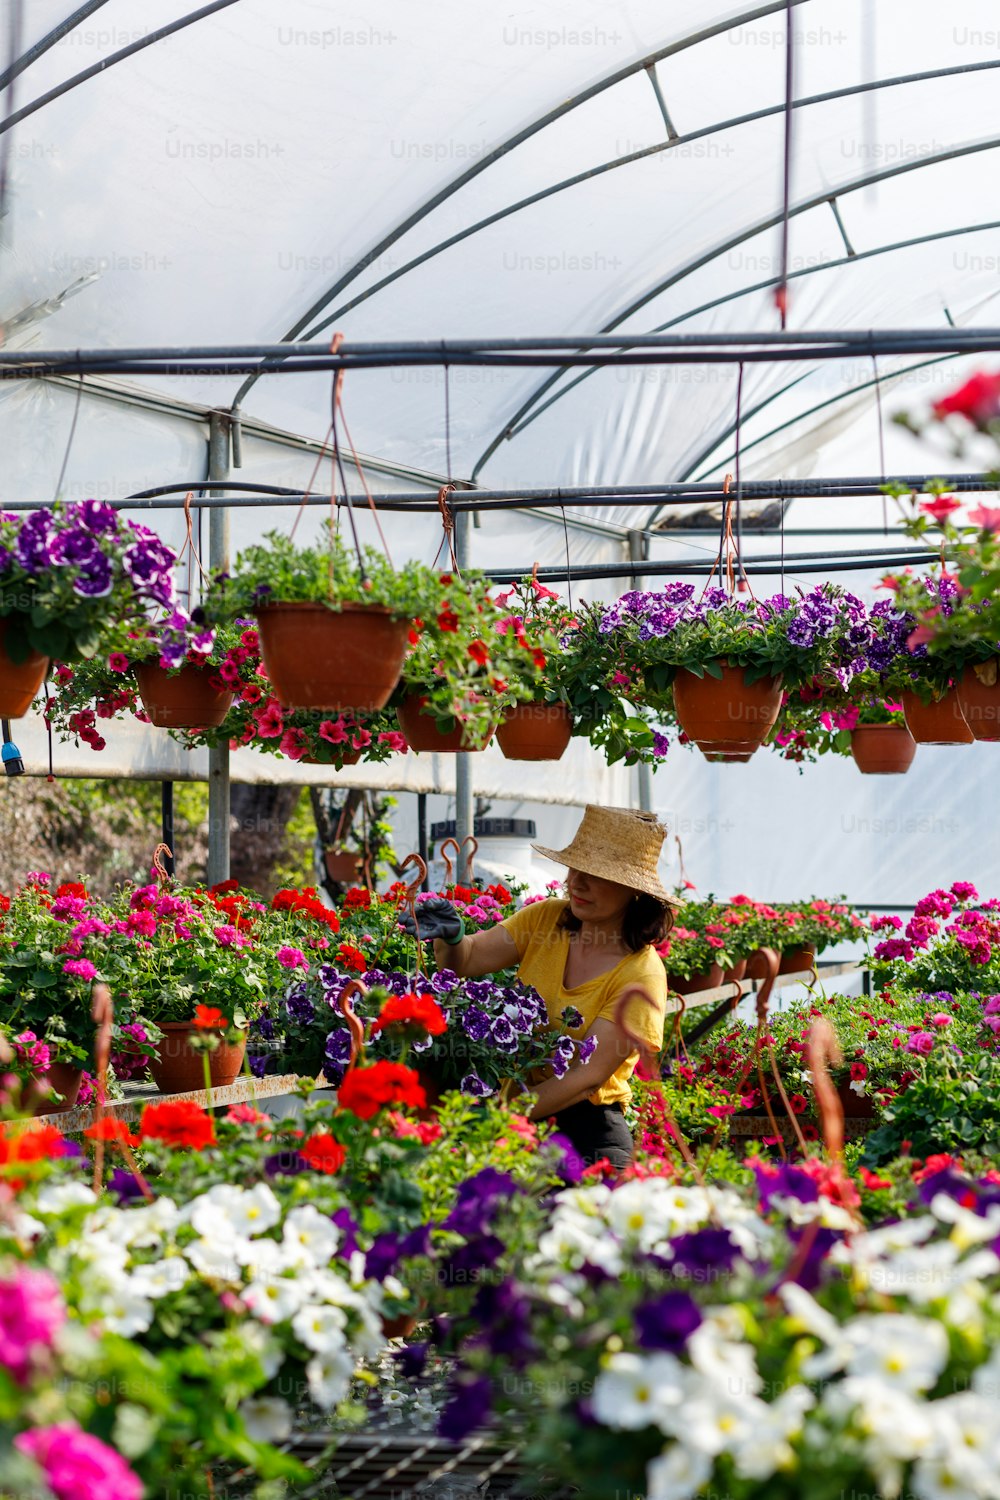 a woman working in a greenhouse filled with flowers